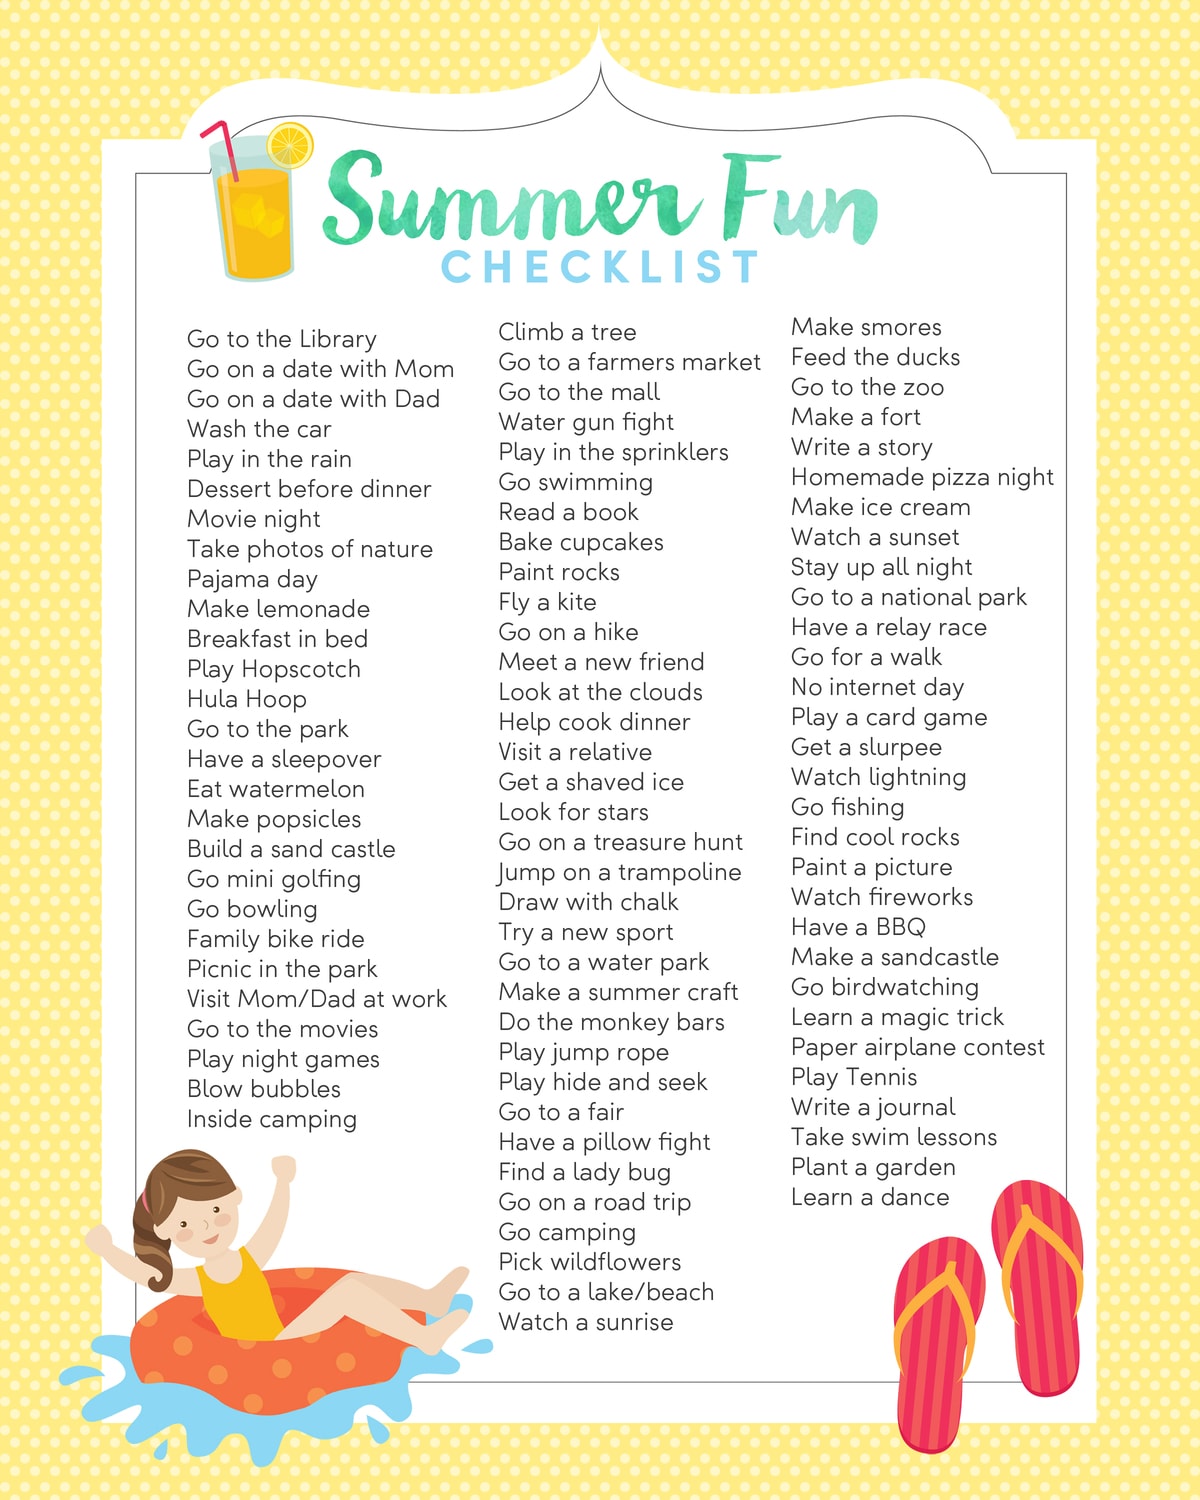 Summer Fun Checklist - FREE printable with lots of fun and creative activities to bust your kids' summer boredom!